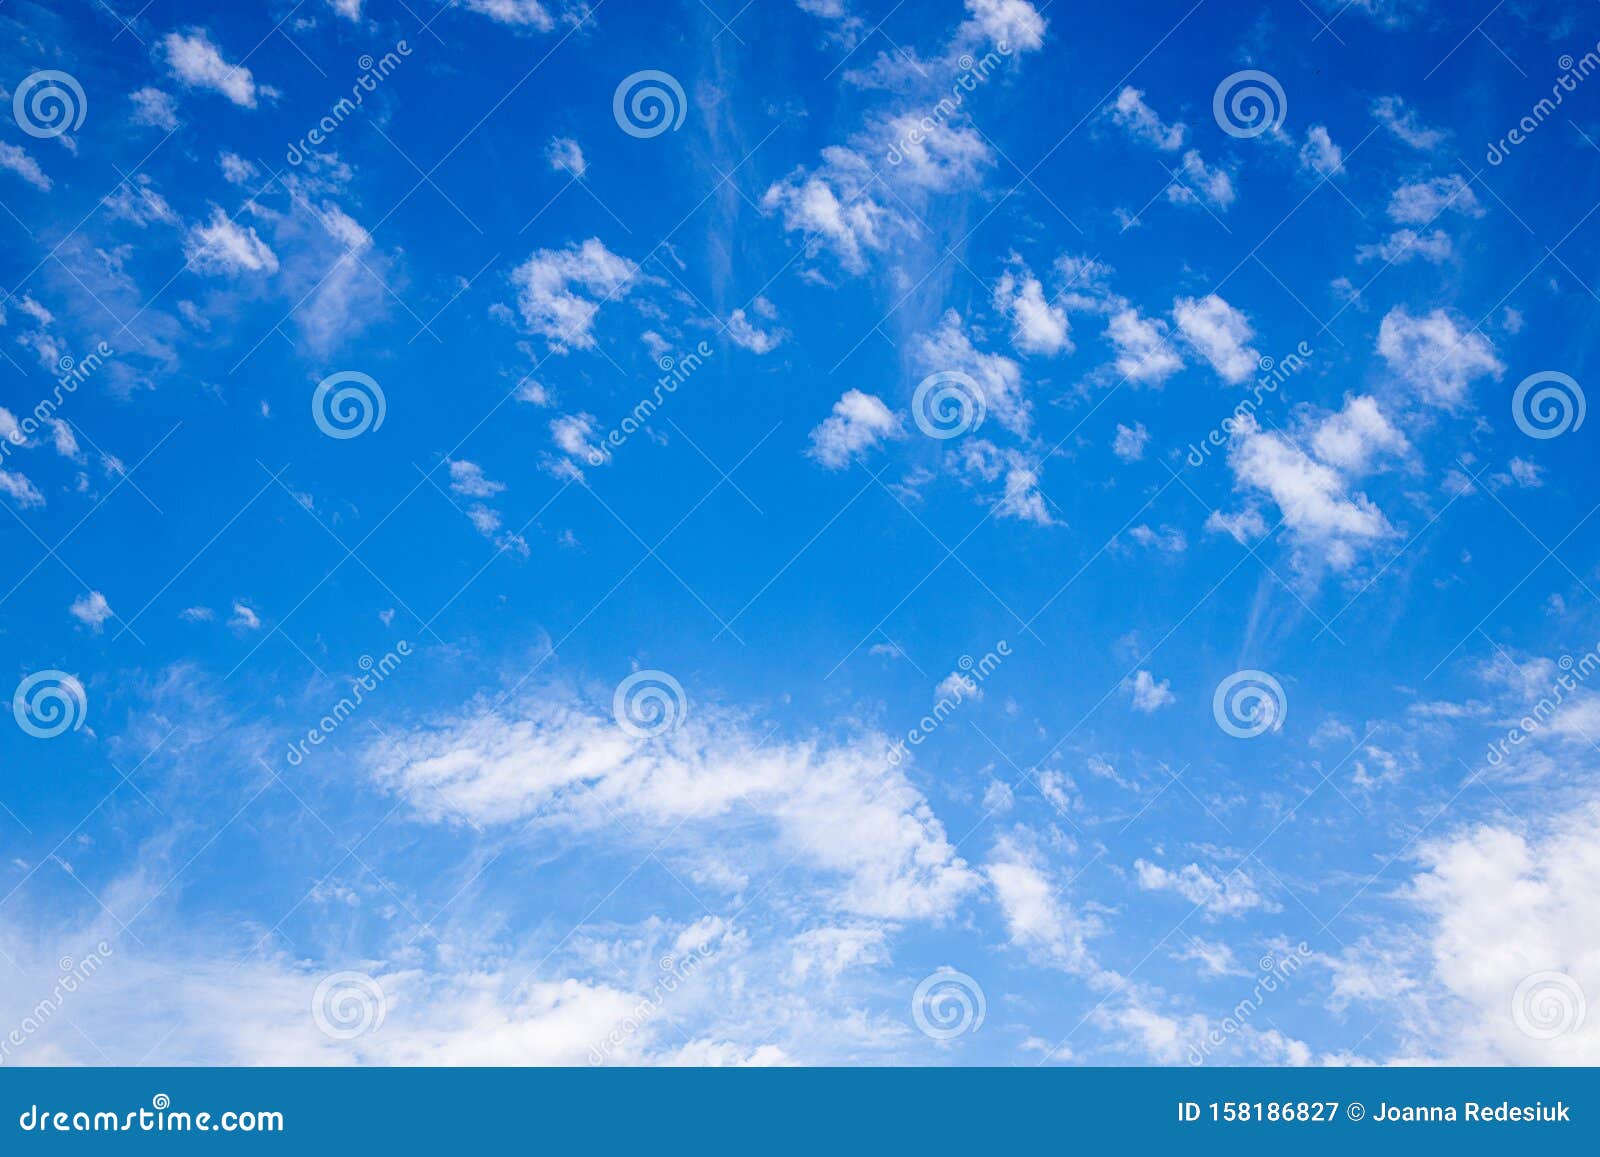 Background of the Bright Blue Sky with White Clouds on a Sunny Warm Day ...